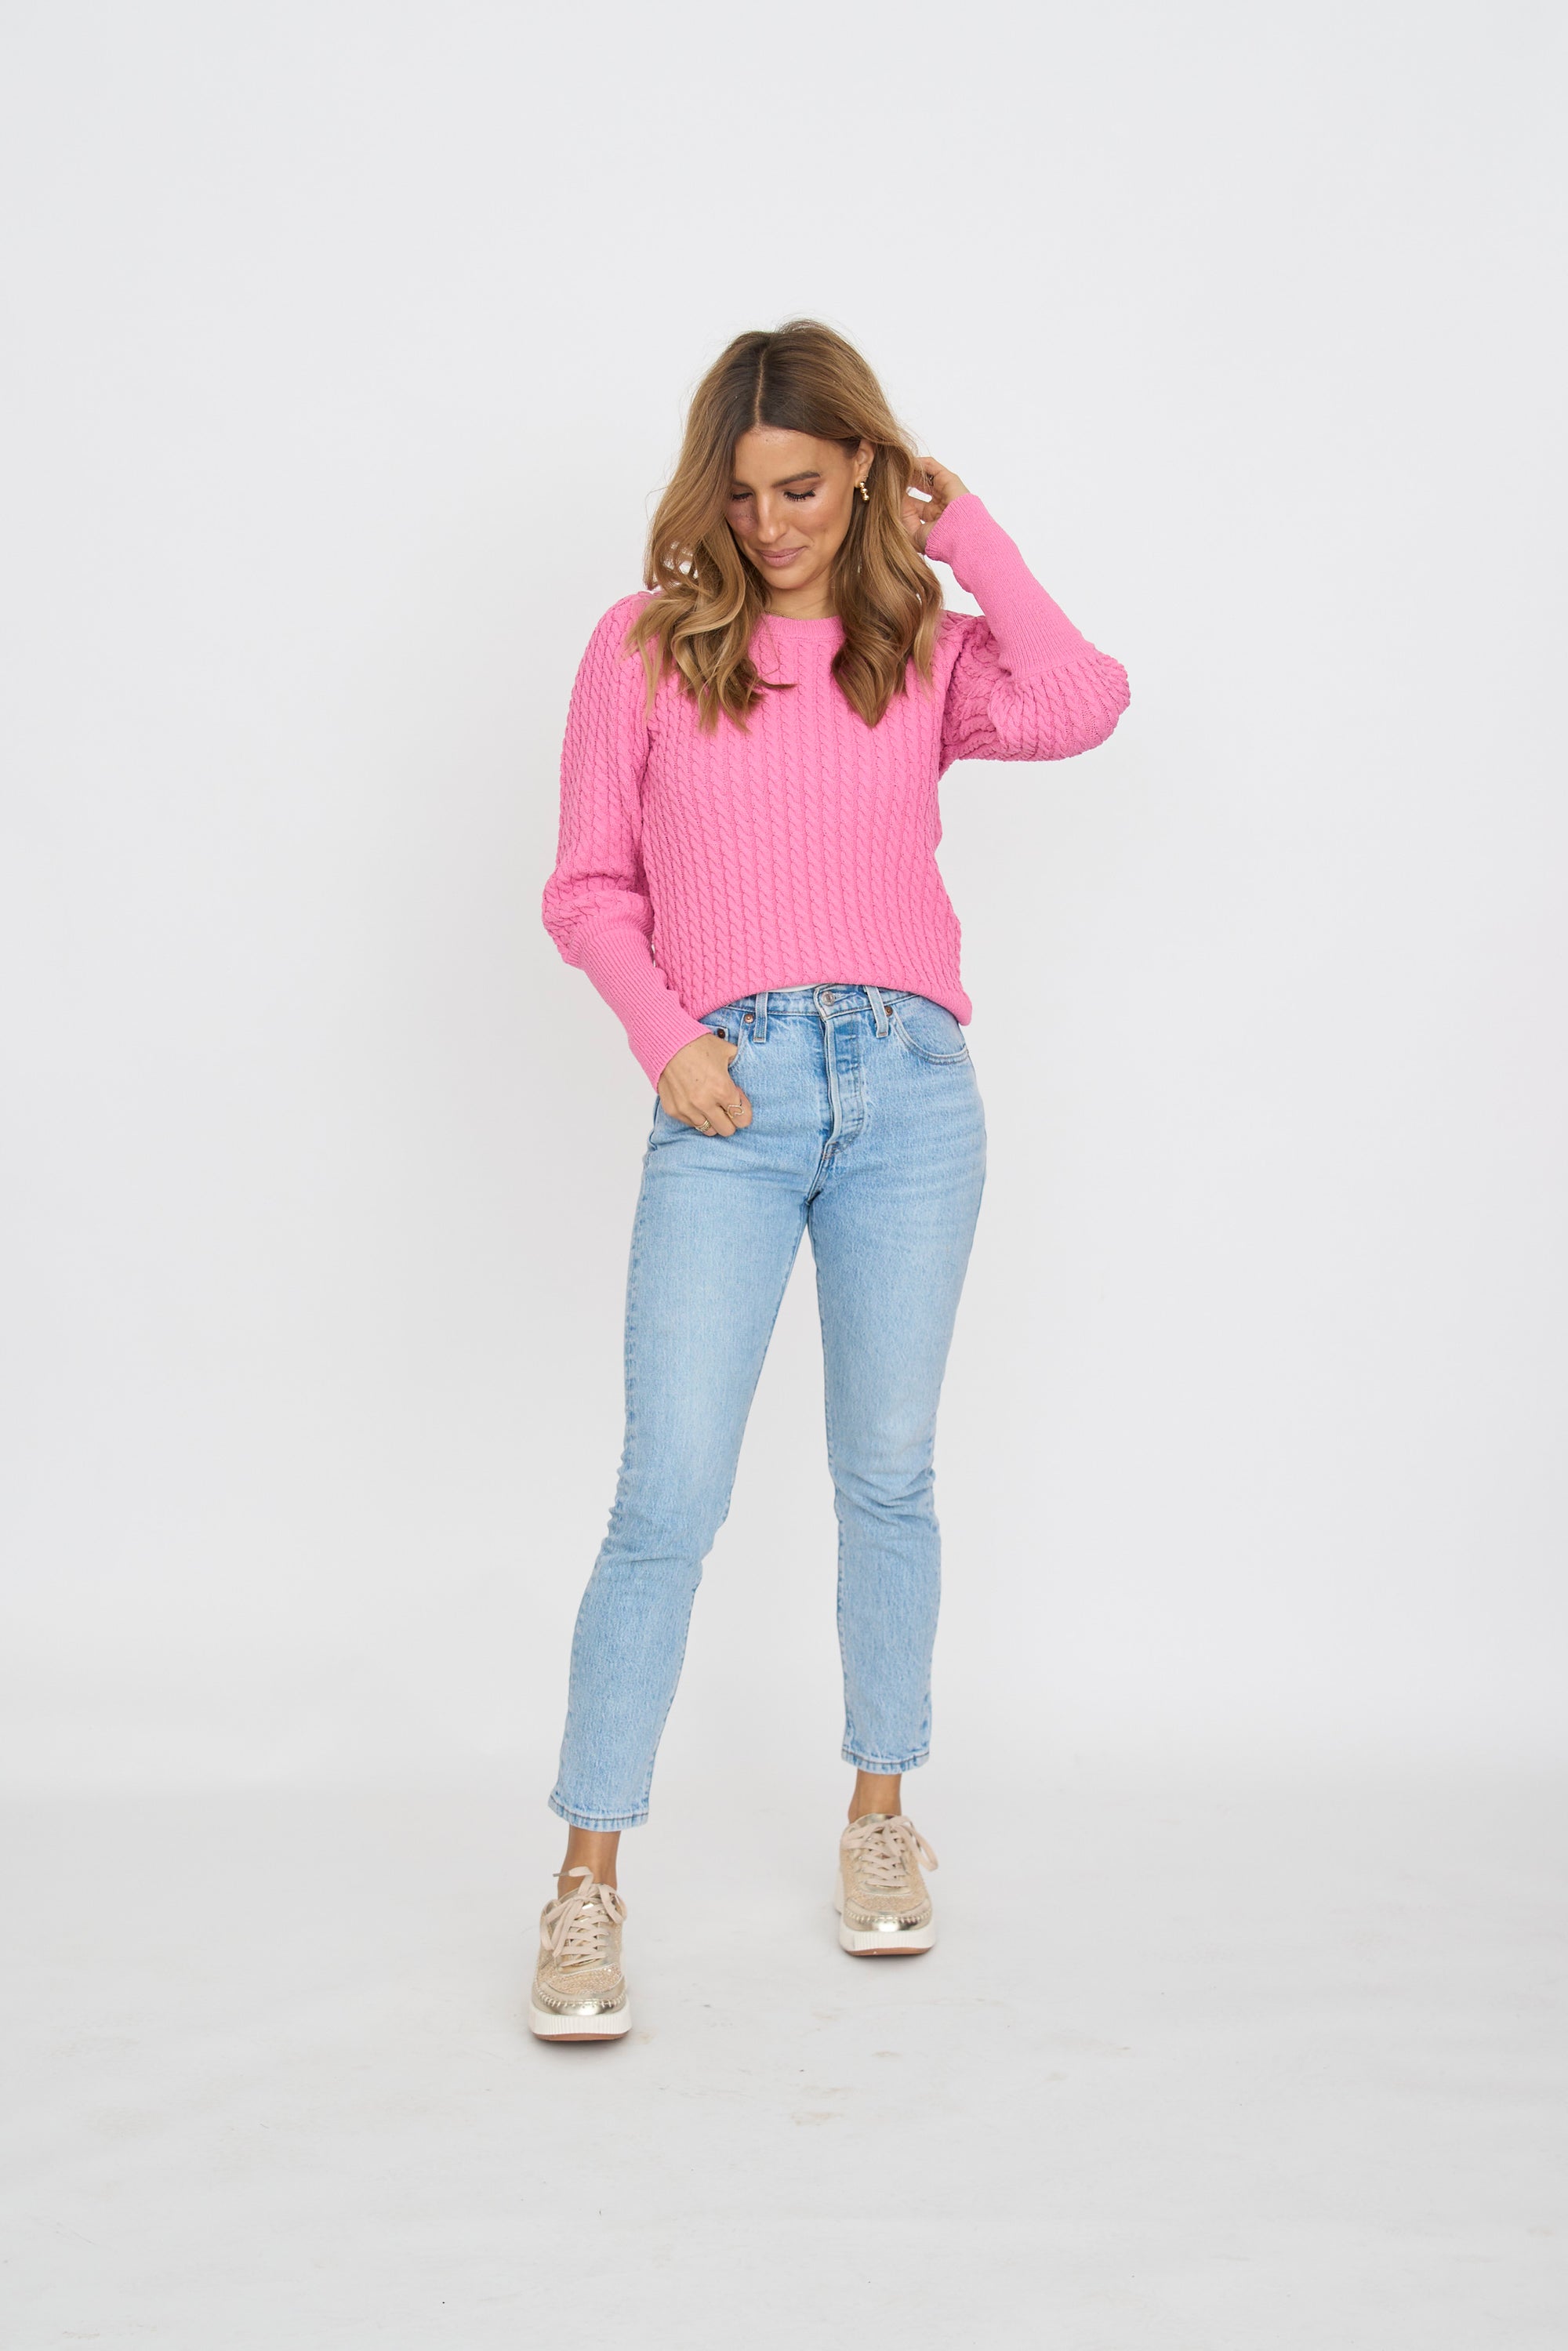 Suzanne Puff Sleeve Knit Top